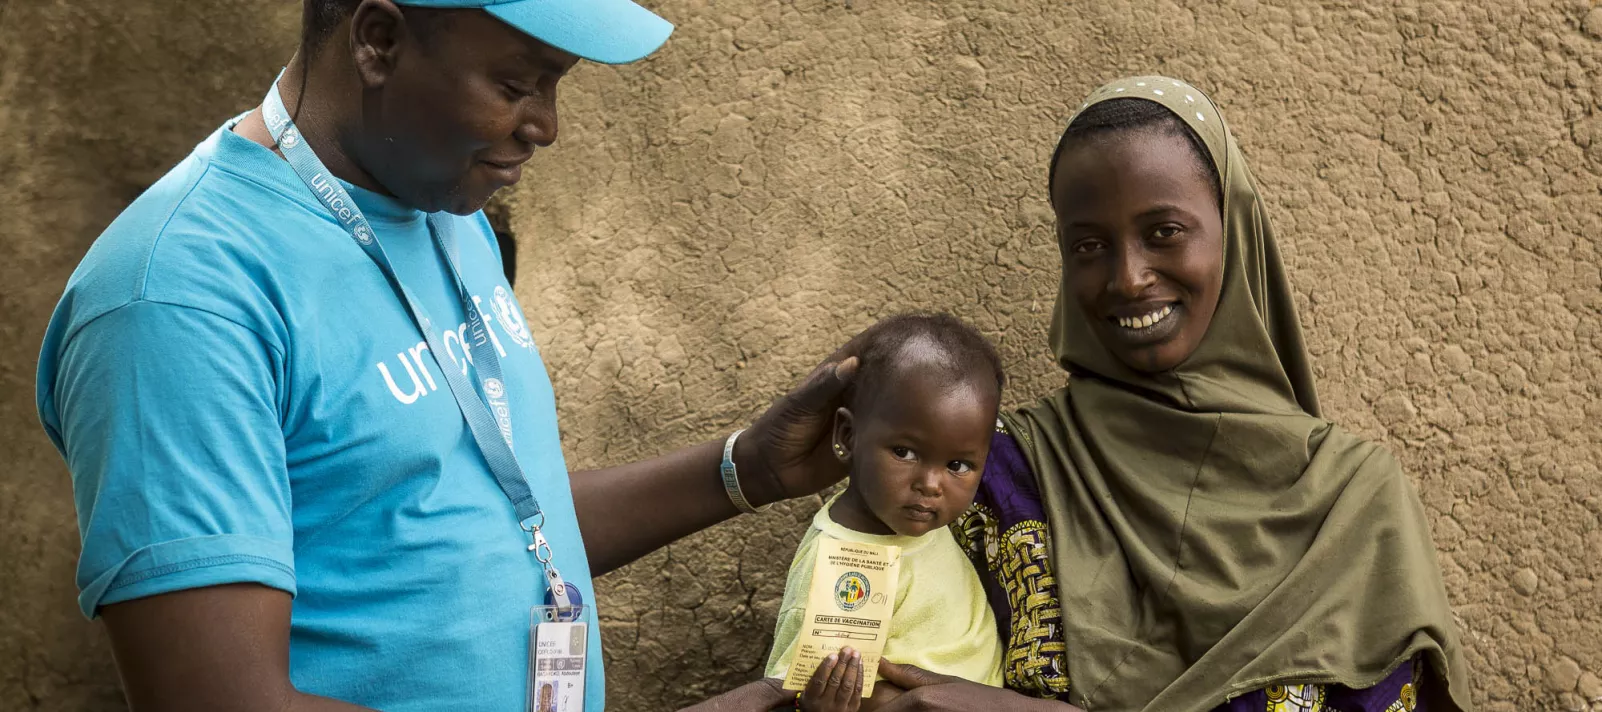 Abdoulaye Bagayoko, Immunization officer at UNICEF’s Mopti field office, sensitizing a mother to complete the vaccination of her child